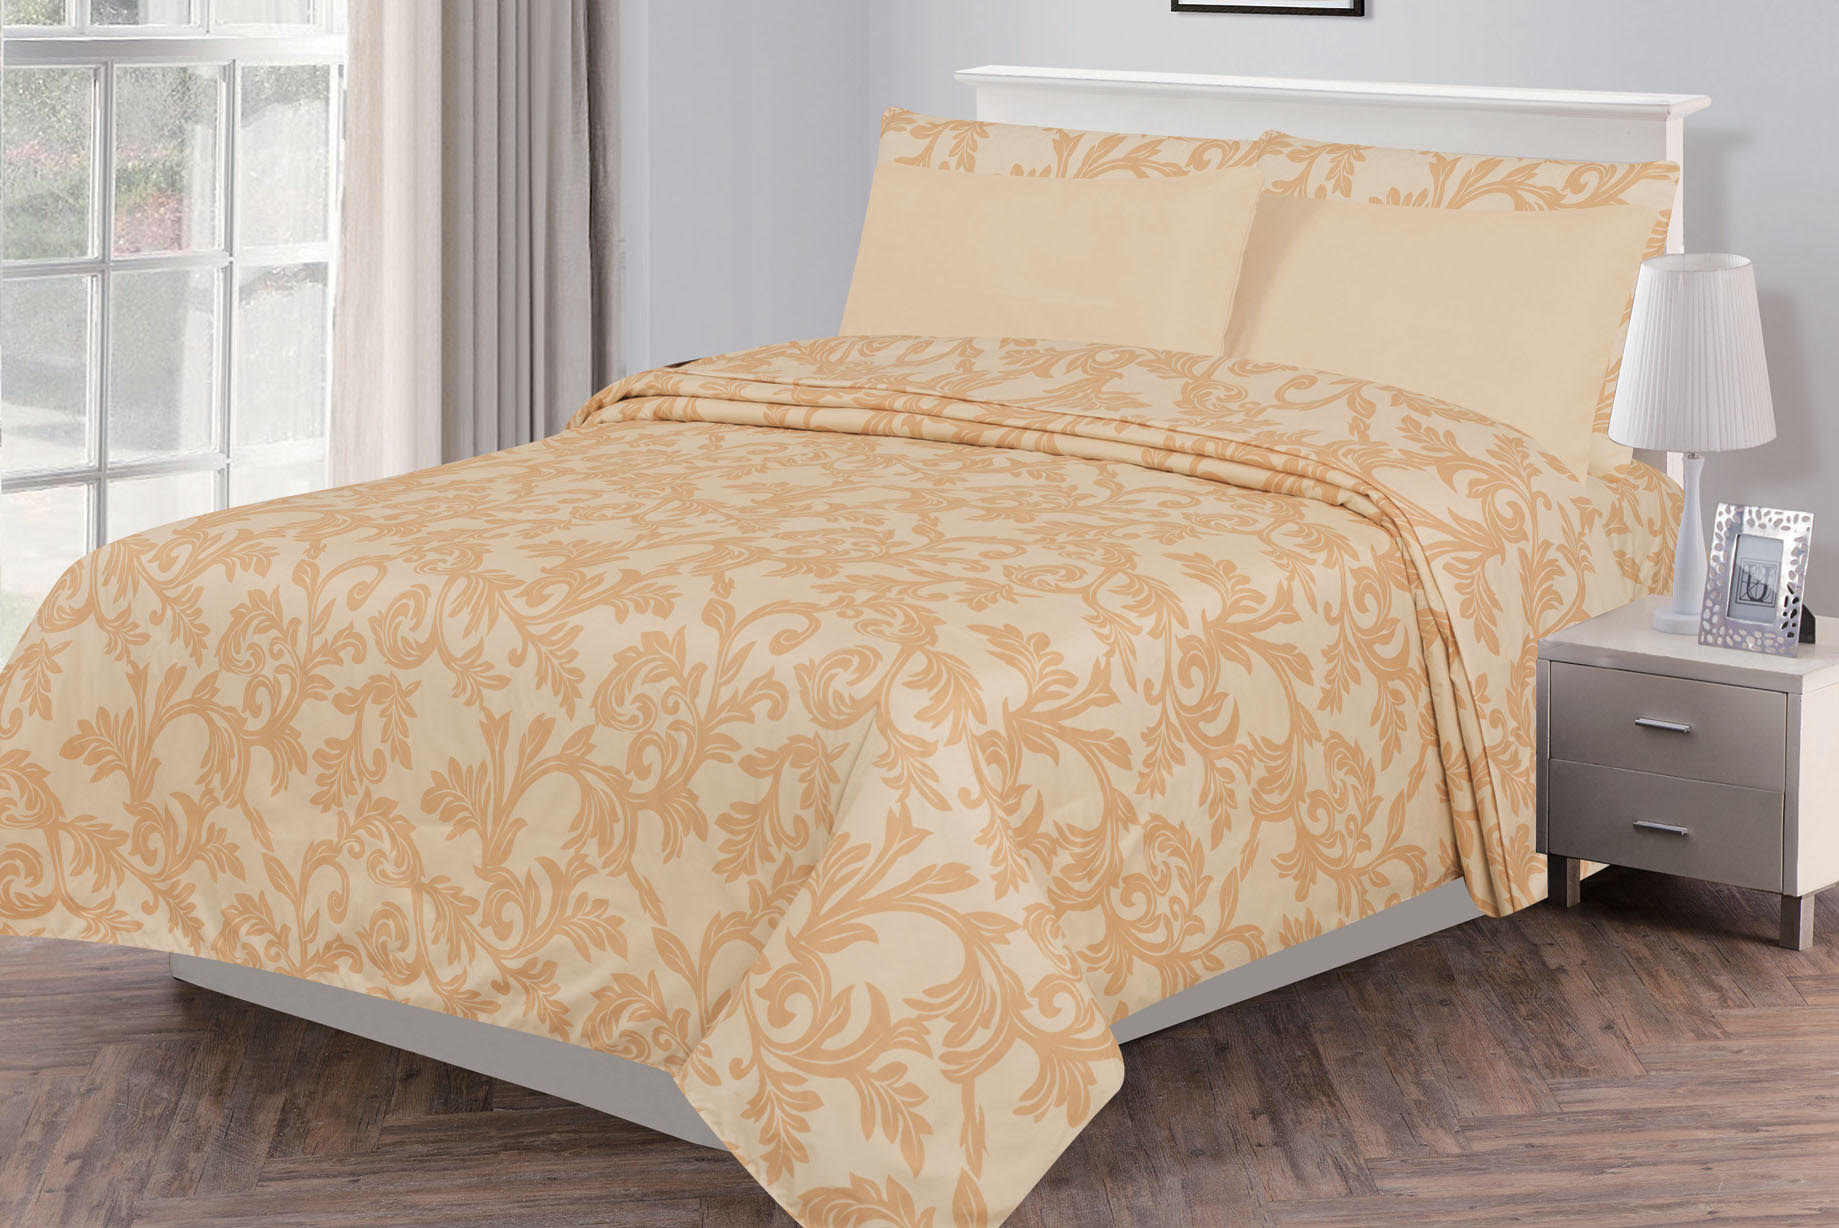 6 Piece: Kendall Printed 1800 Bedding Soft Bed Sheet Set - Wrinkle, Fade, Stain Resistant - Hypoallergenic, Sheets Set - Queen, Taupe